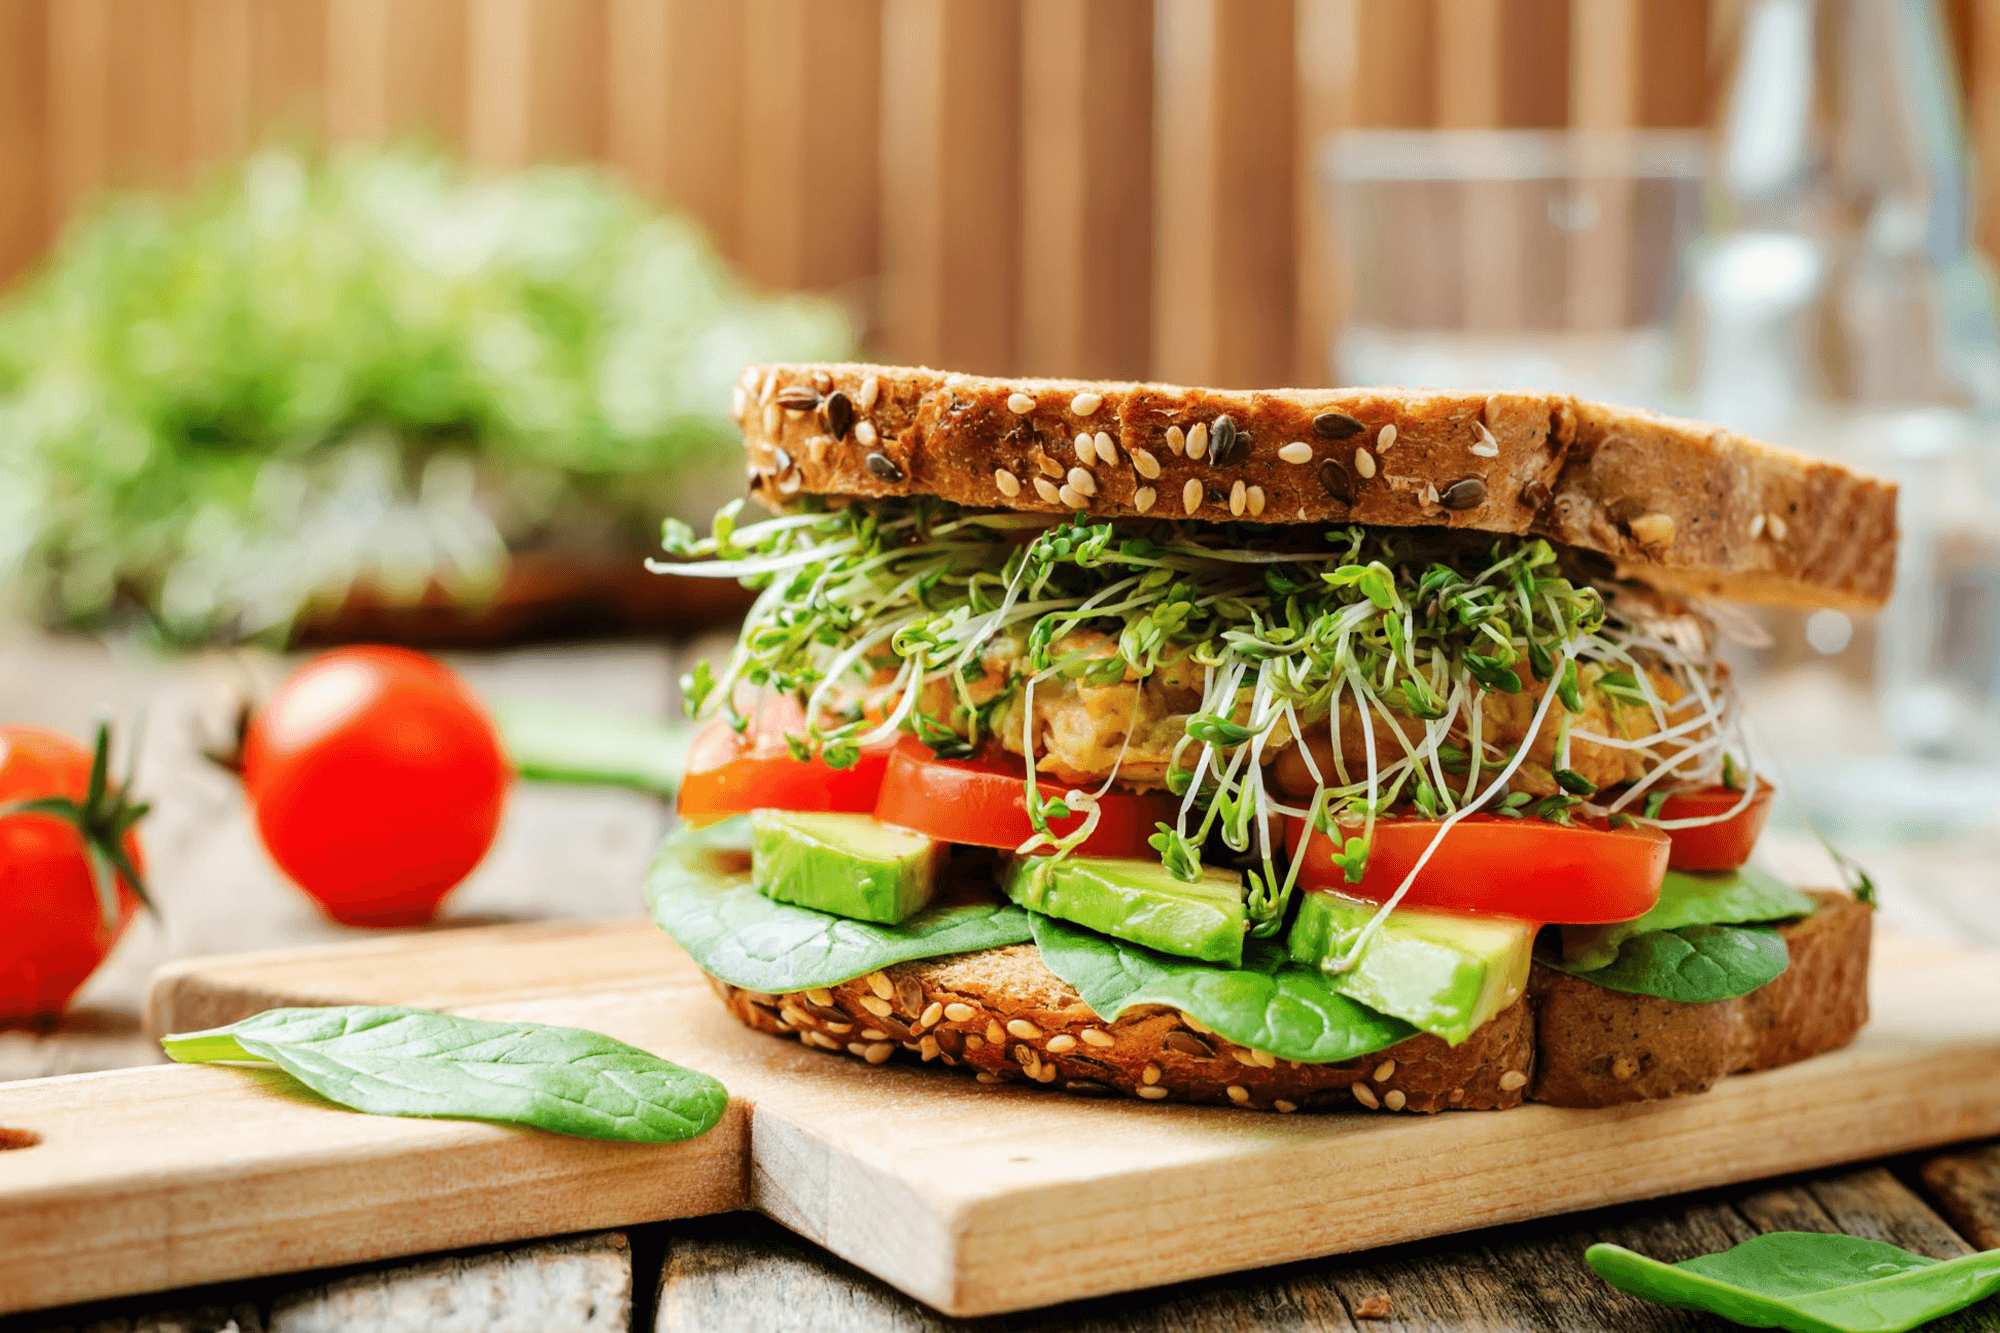 Try these Super delicious Sandwiches at Timeout Market Dubai